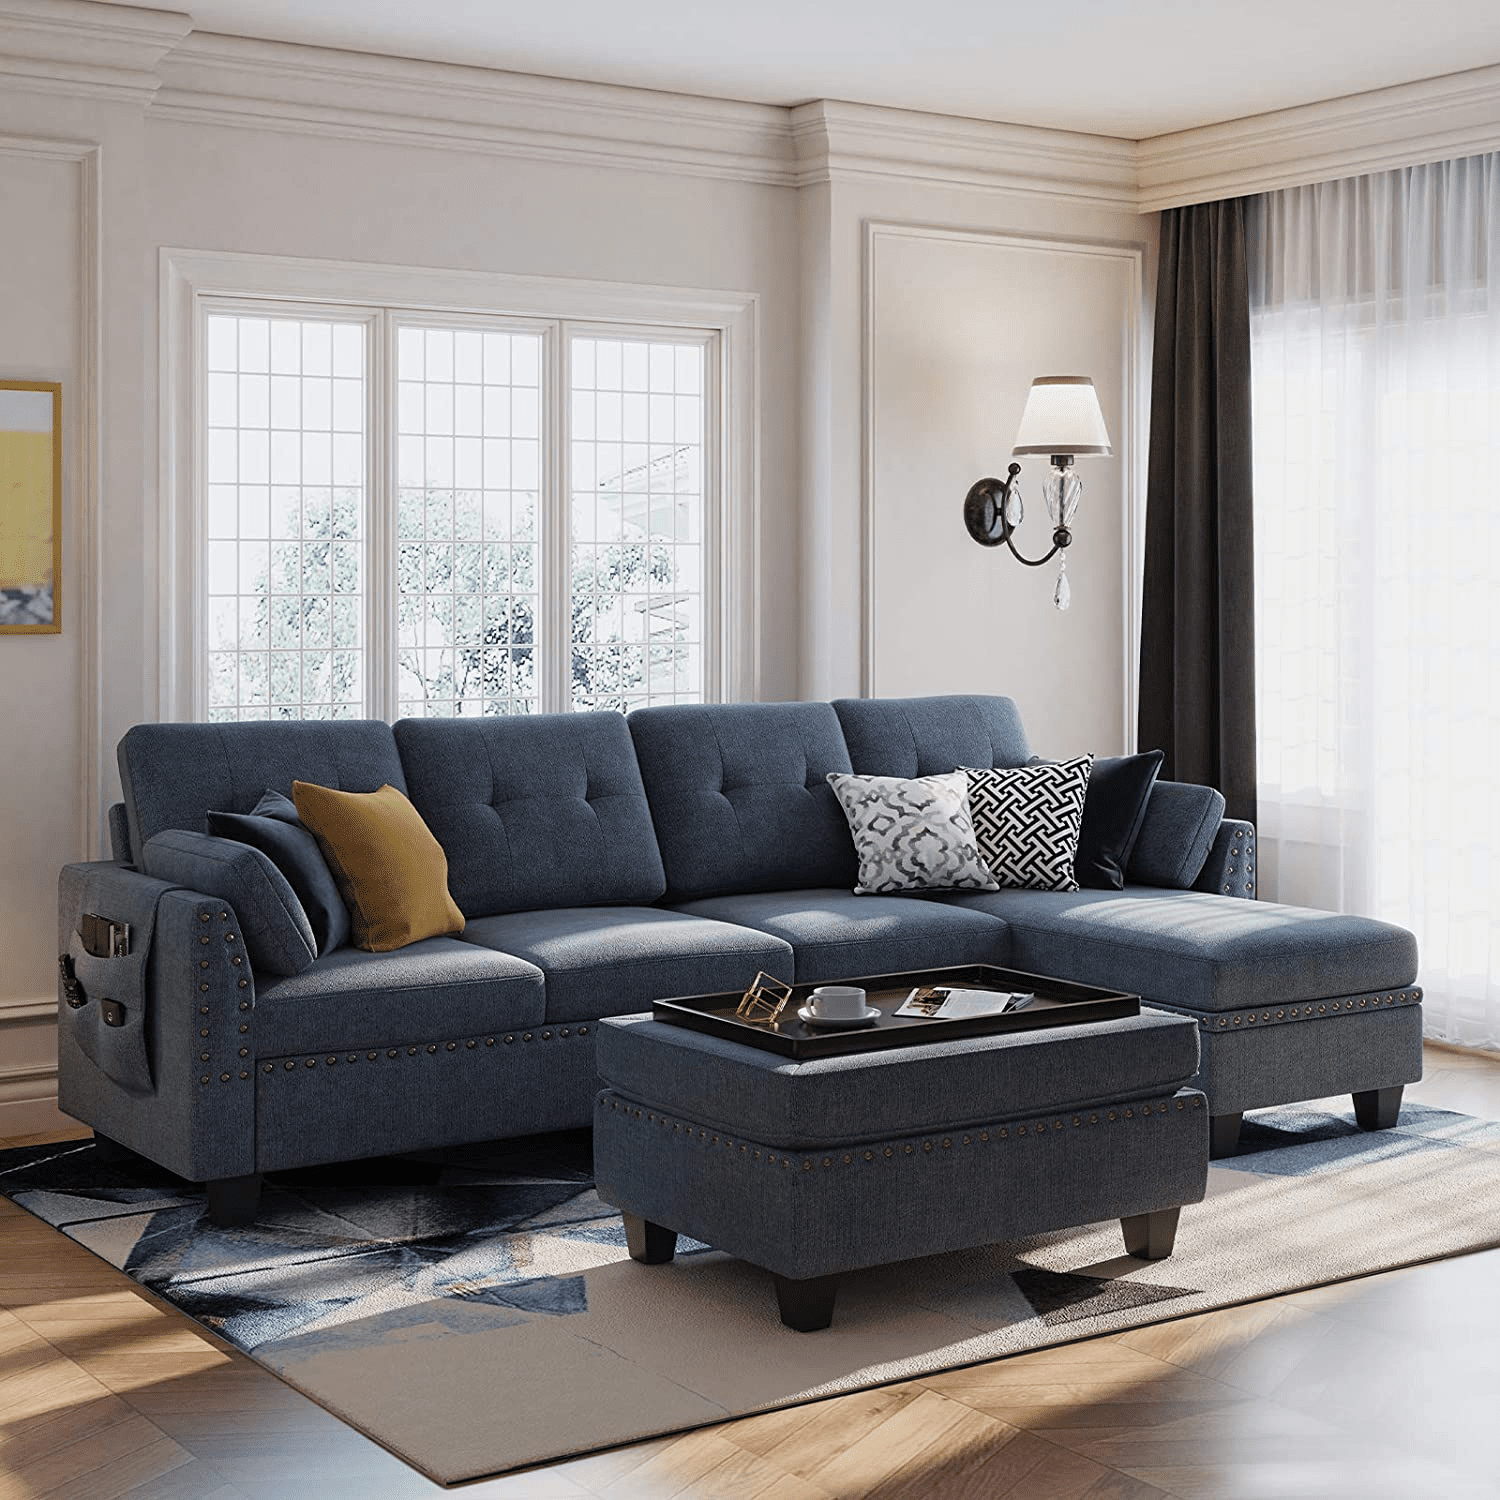 Honbay Convertible Sectional Sofa Set 4 Seat Couch With Tray Storage  Ottoman, Bluish Grey – Walmart Intended For Sofas In Bluish Grey (View 2 of 15)